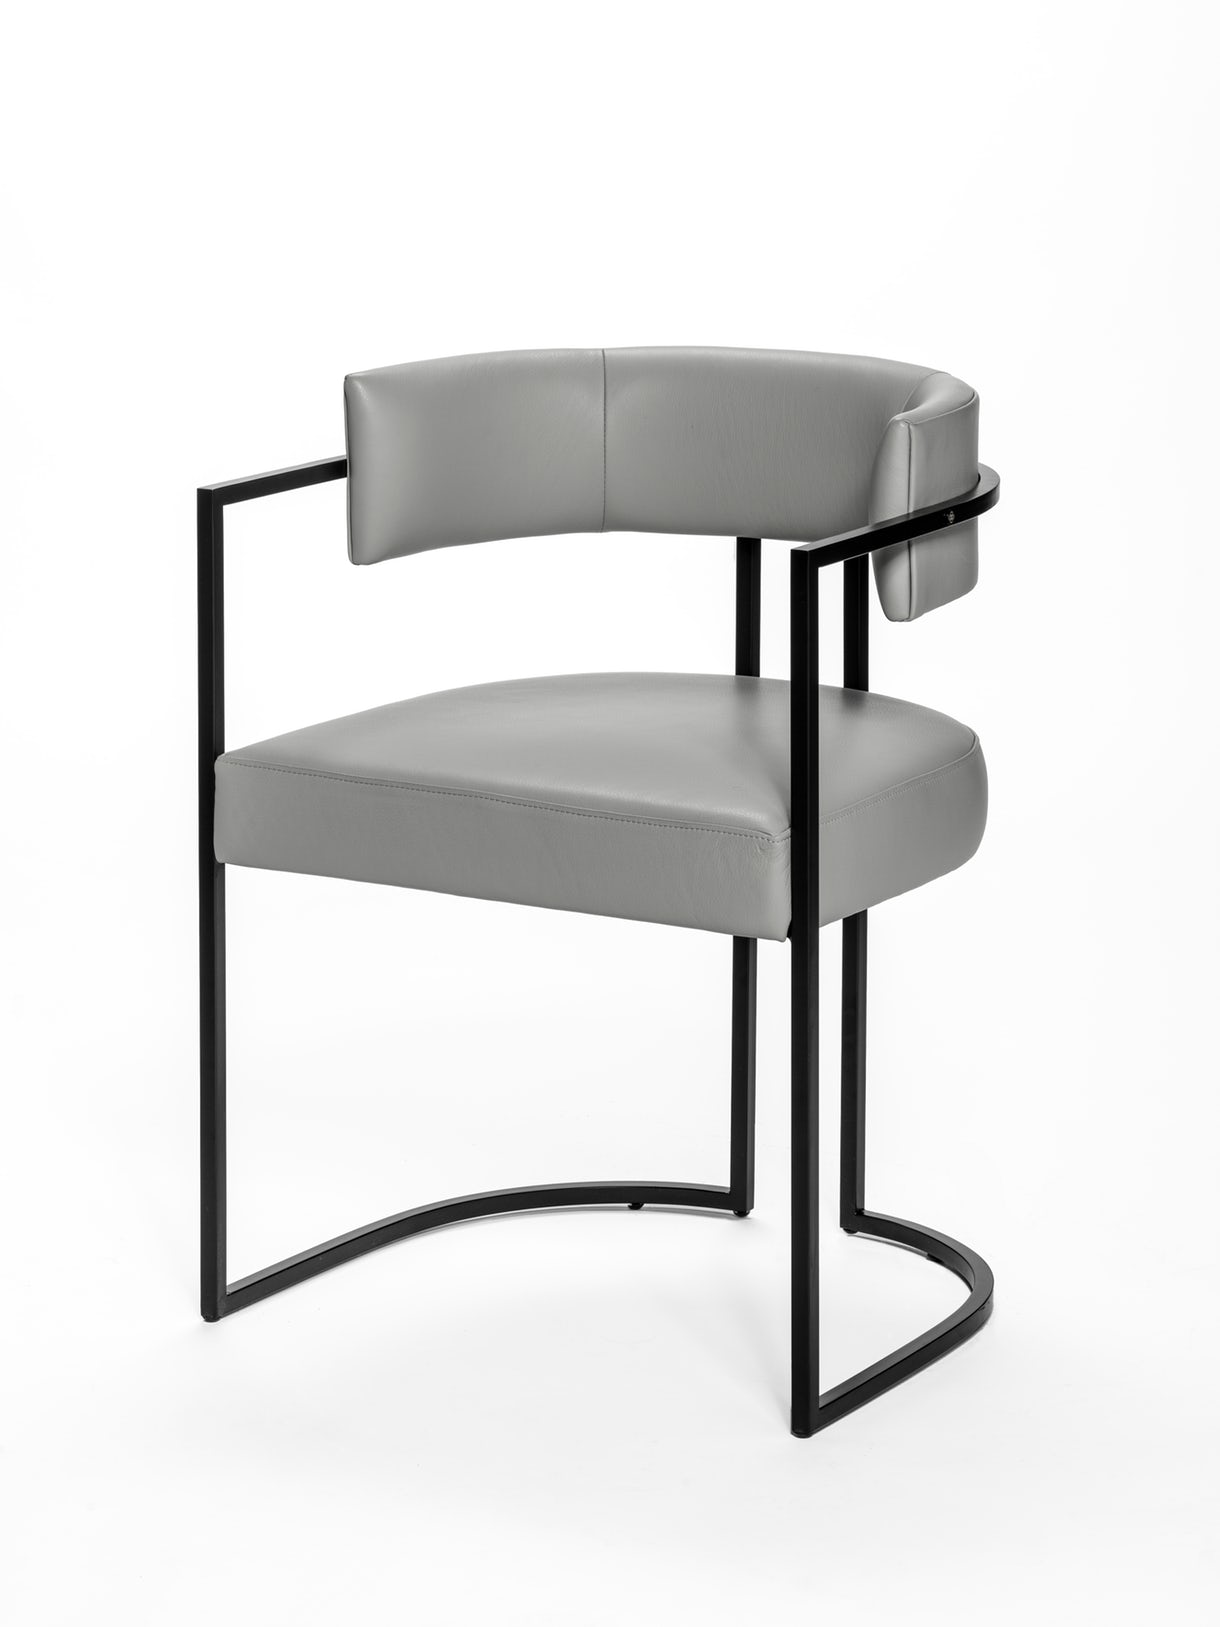 Sleek curved lines, combined with luxurious upholstery make this a comfortable and classic choice for stylish dining rooms or contemporary office spaces. Handmade in (...)